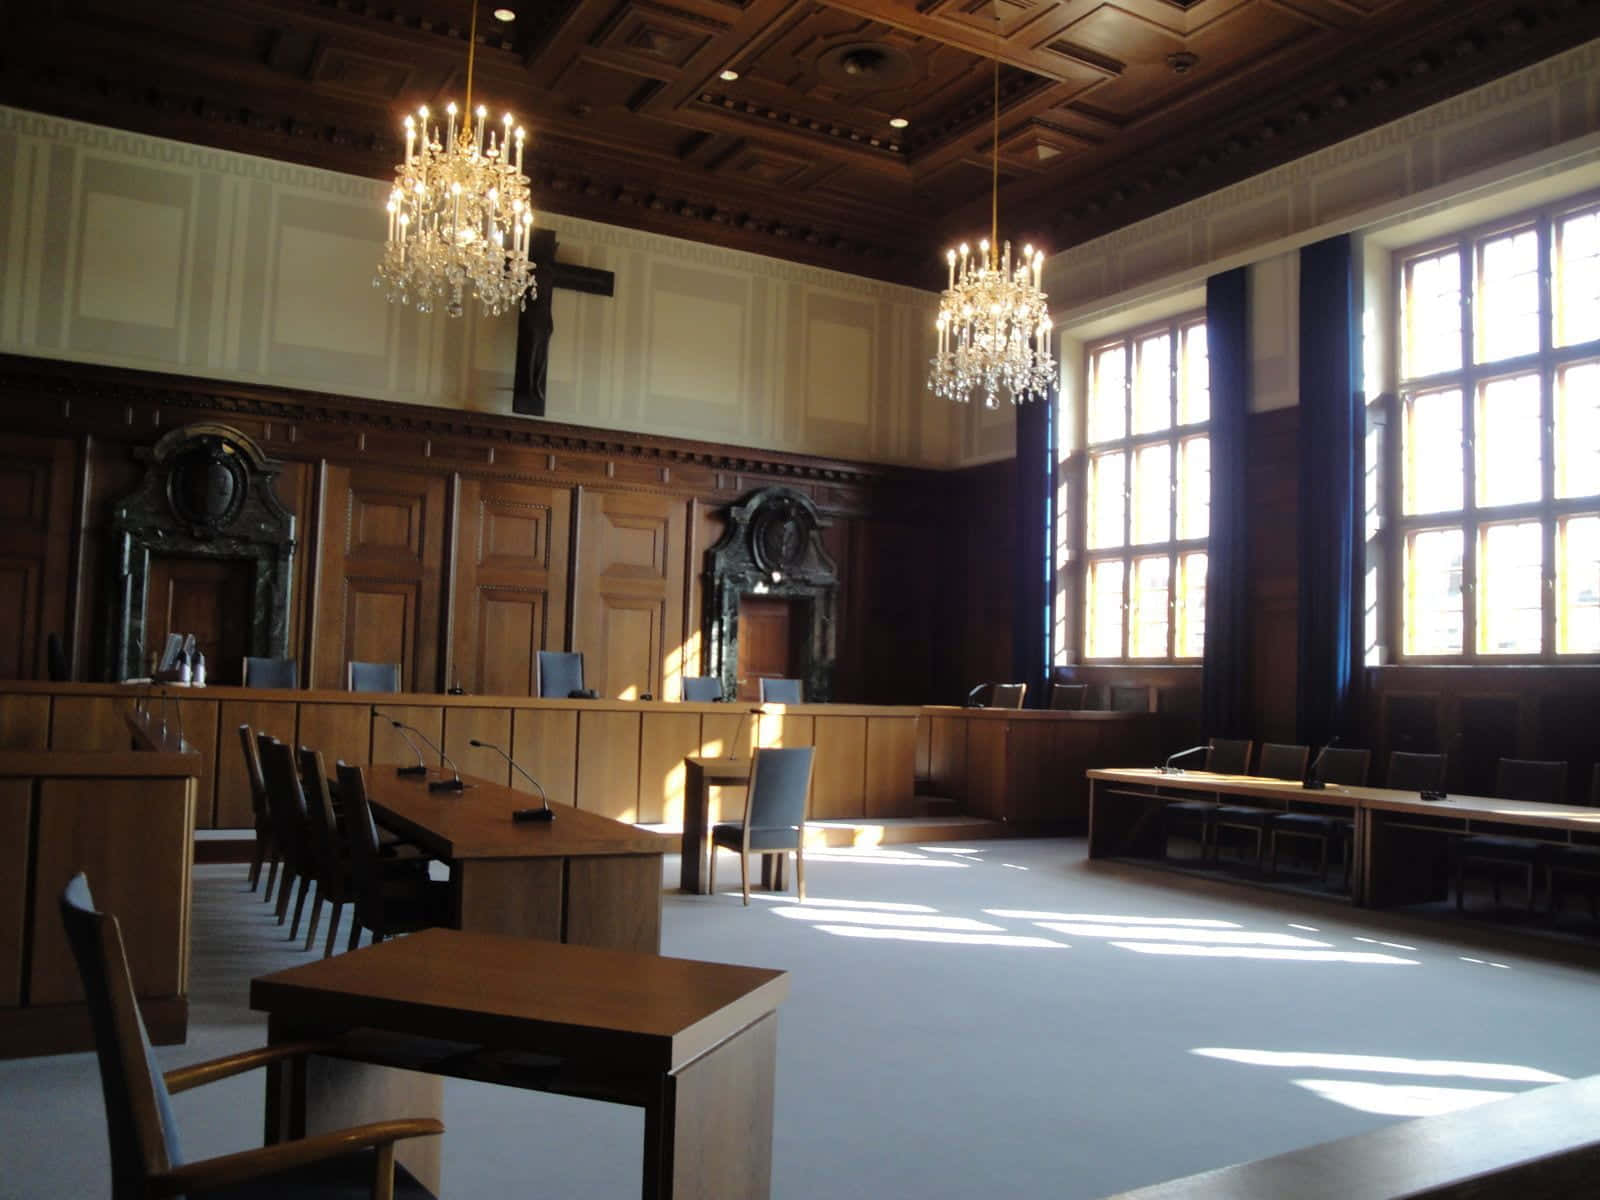 A Courtroom With A Large Number Of Chairs